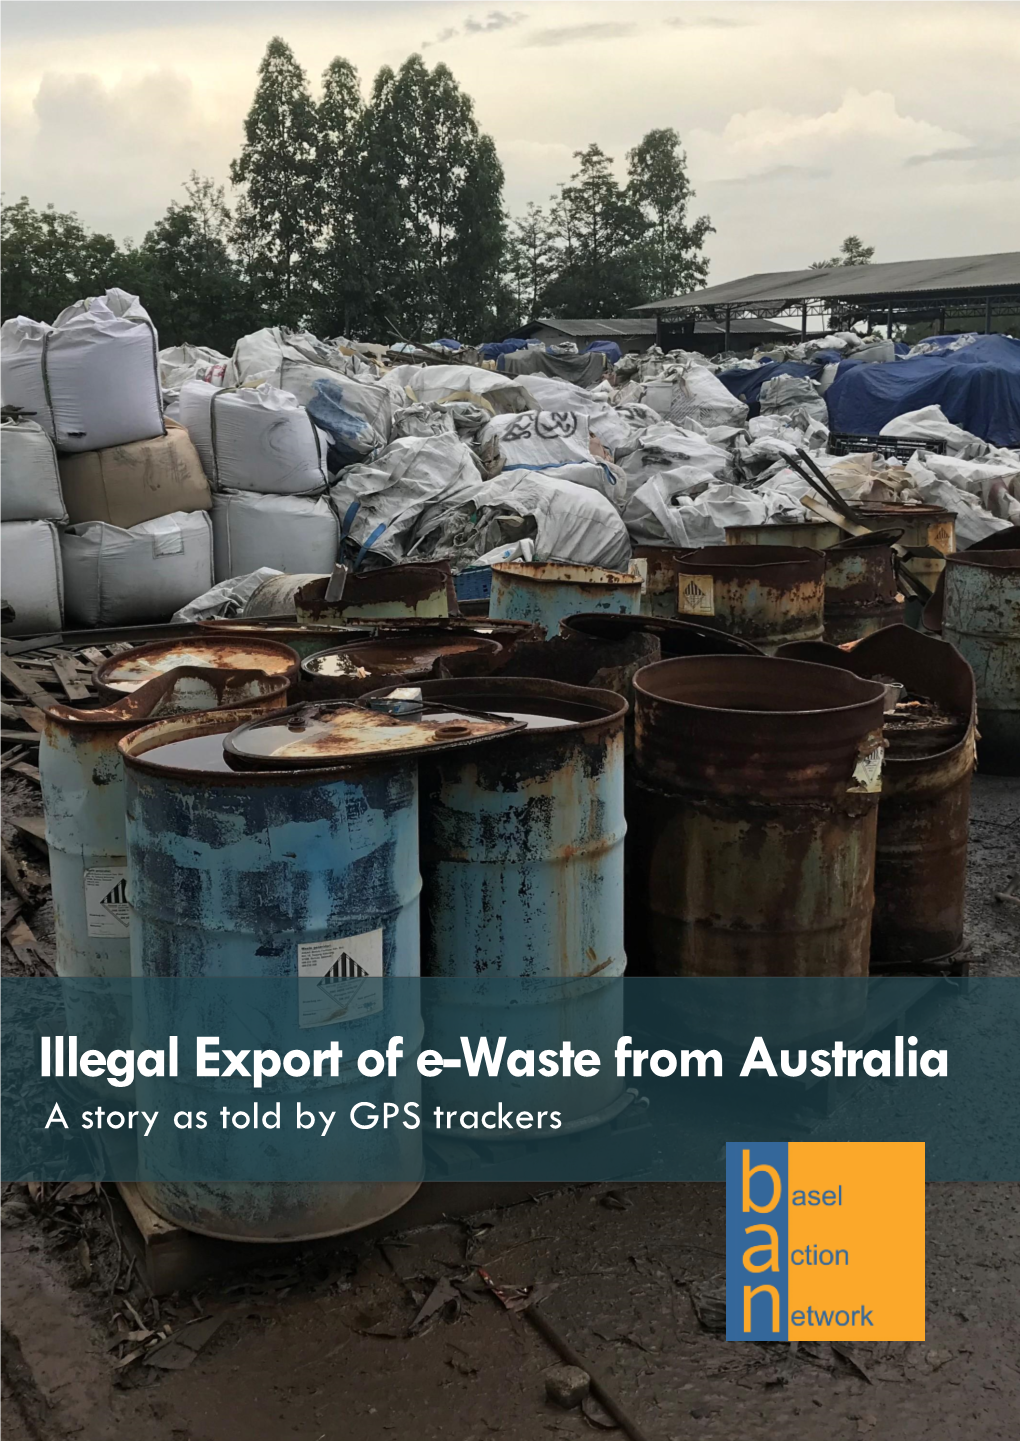 Illegal Export of E-Waste from Australia a Story As Told by GPS Trackers